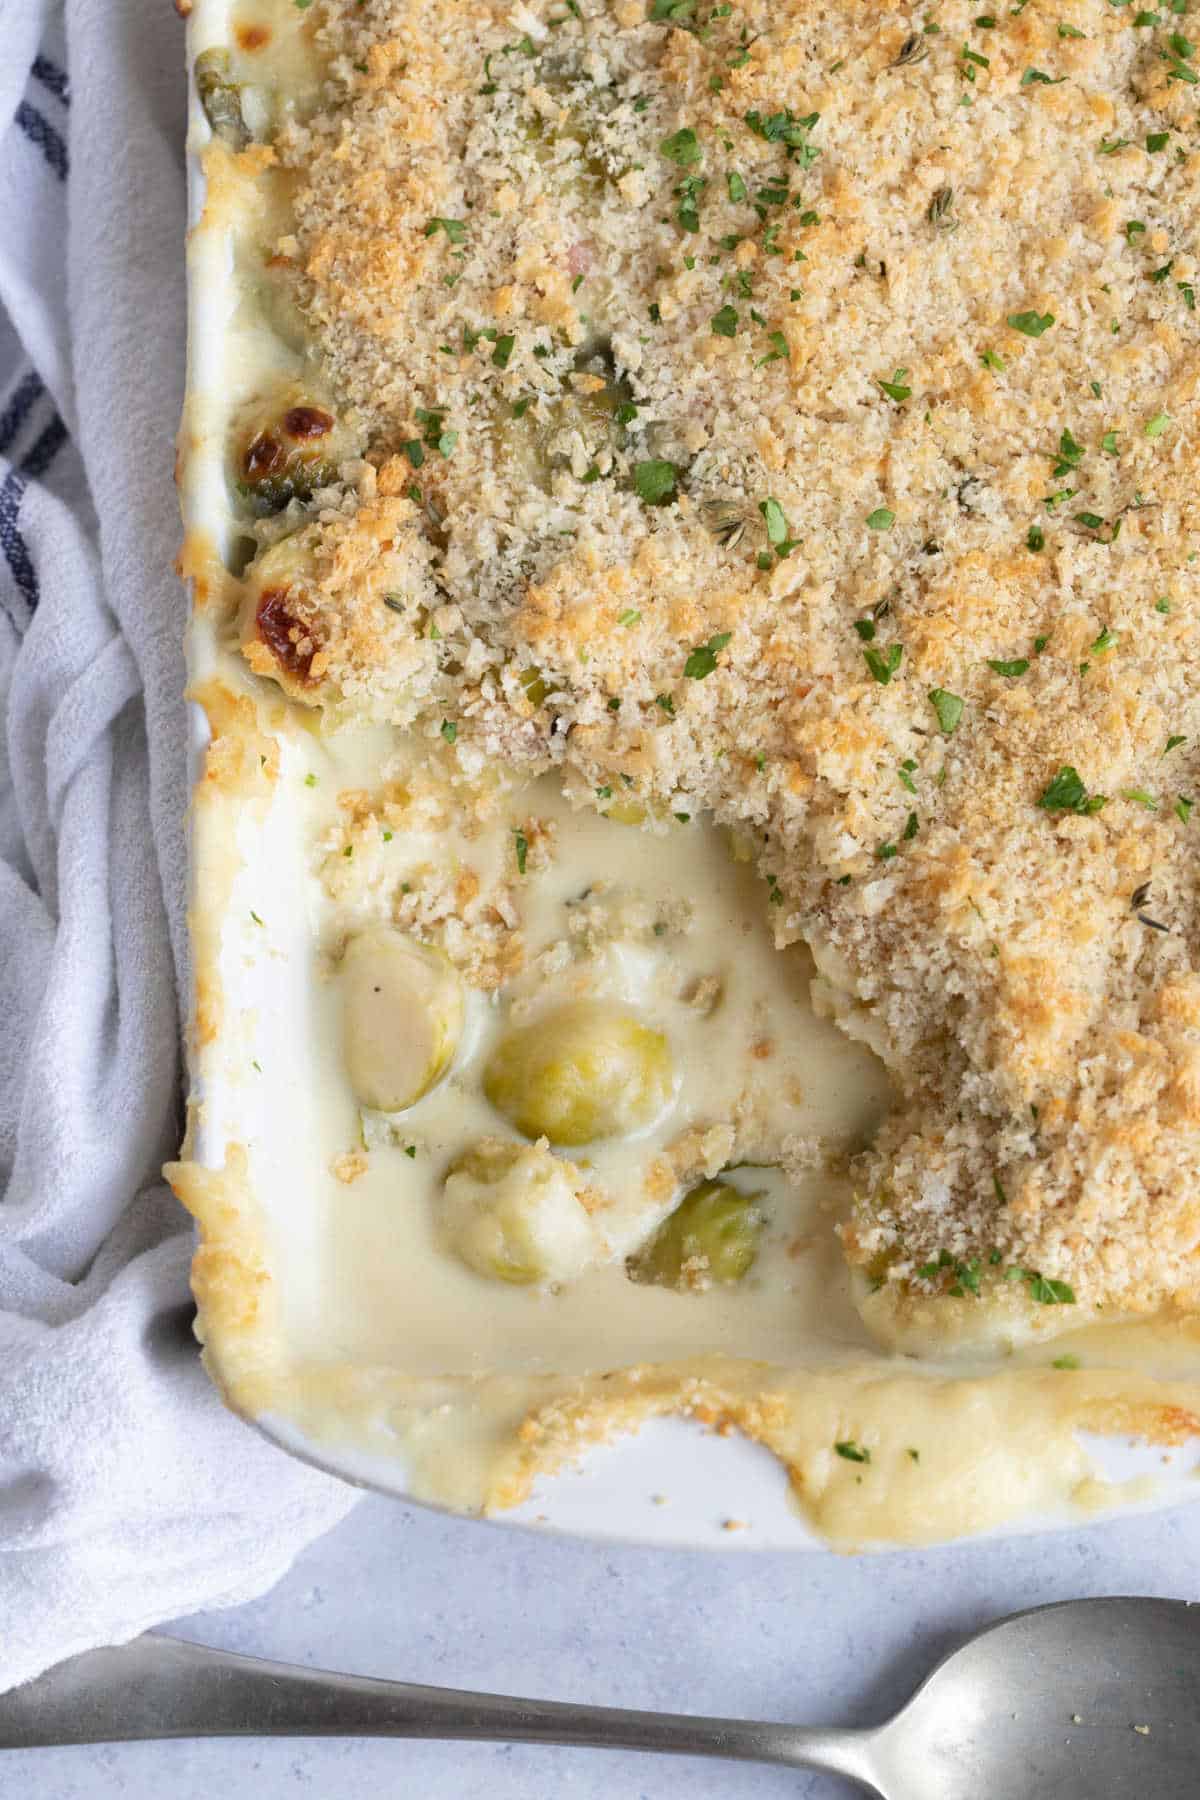 Brussels sprouts gratin in a white baking dish.